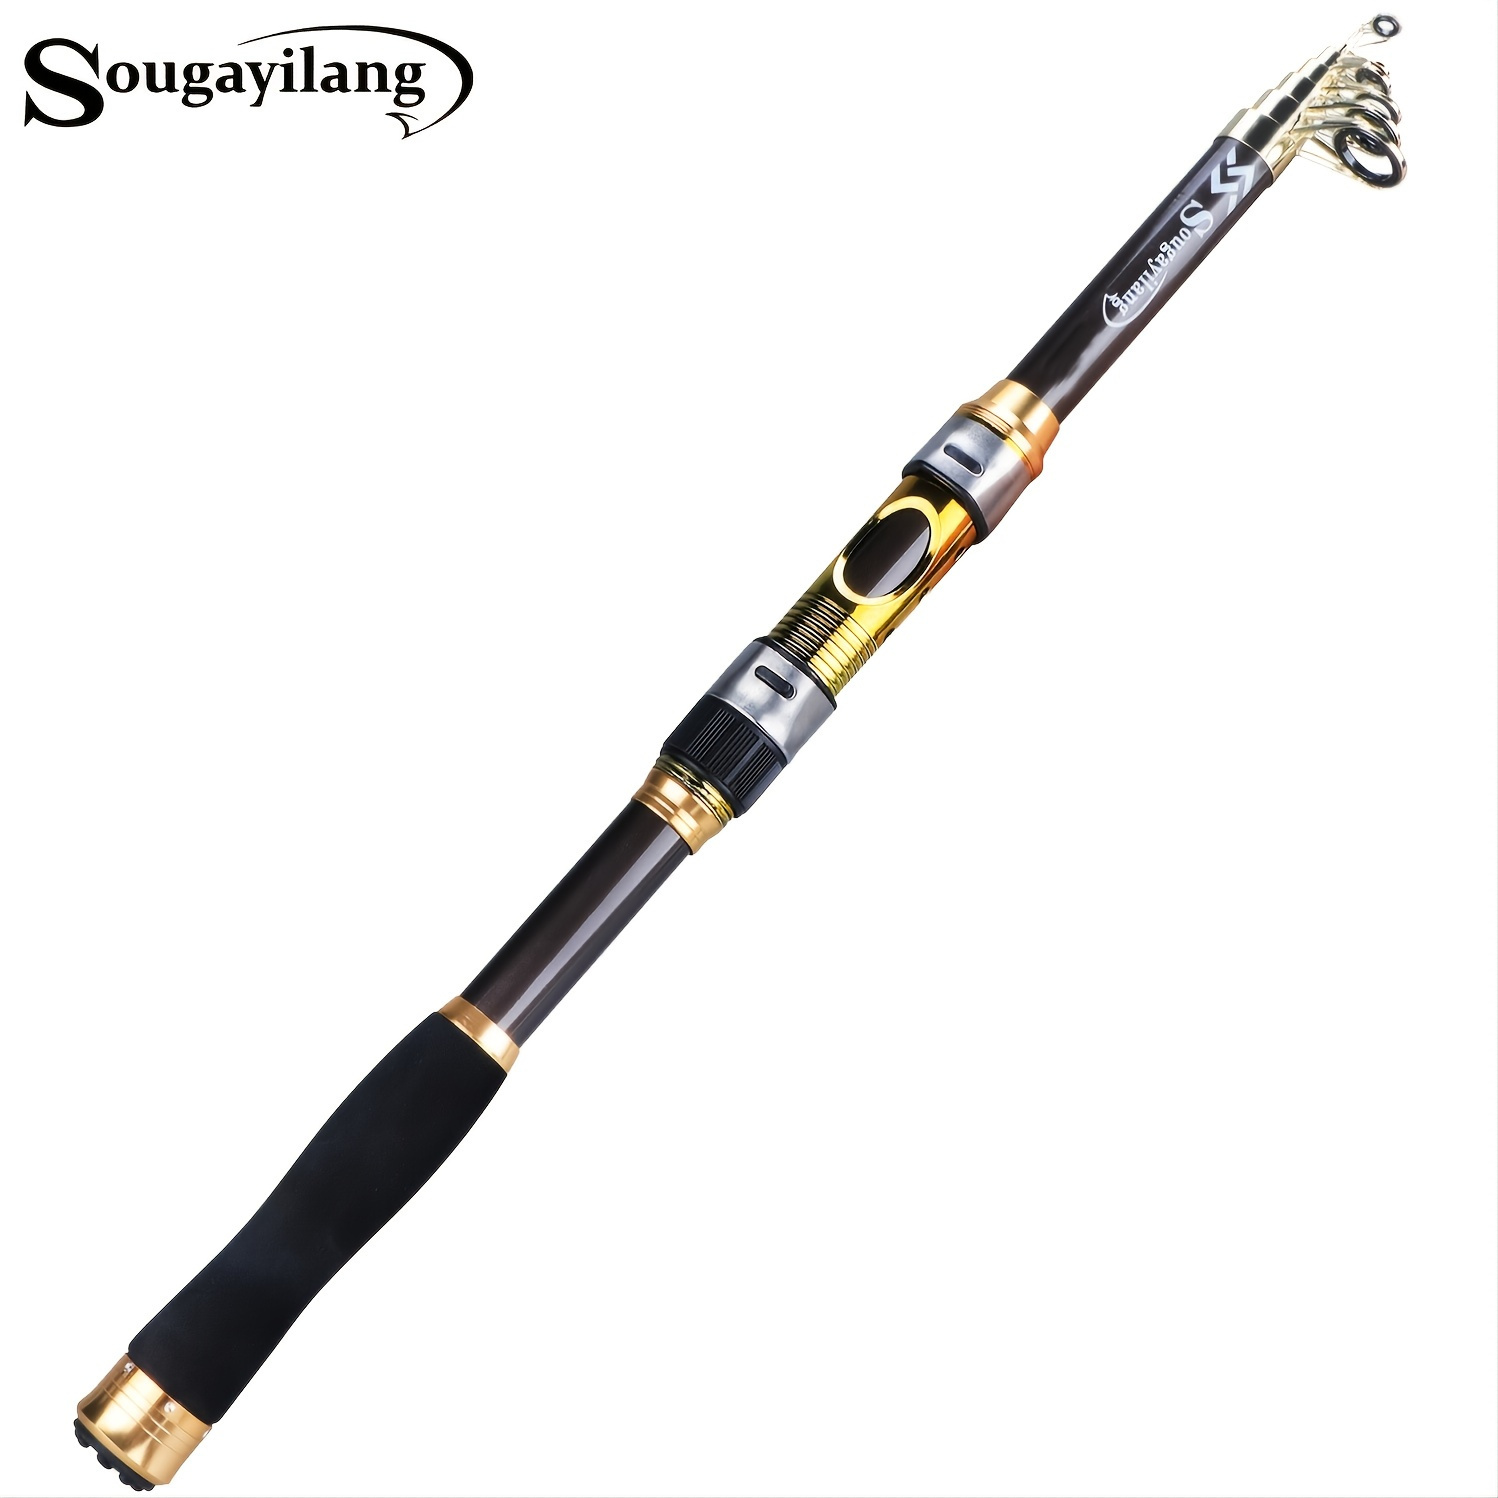 

Sougayilang Ultralight Carbon Fiber Spinning Fishing Rod - Portable And Durable For Freshwater And Saltwater Fishing